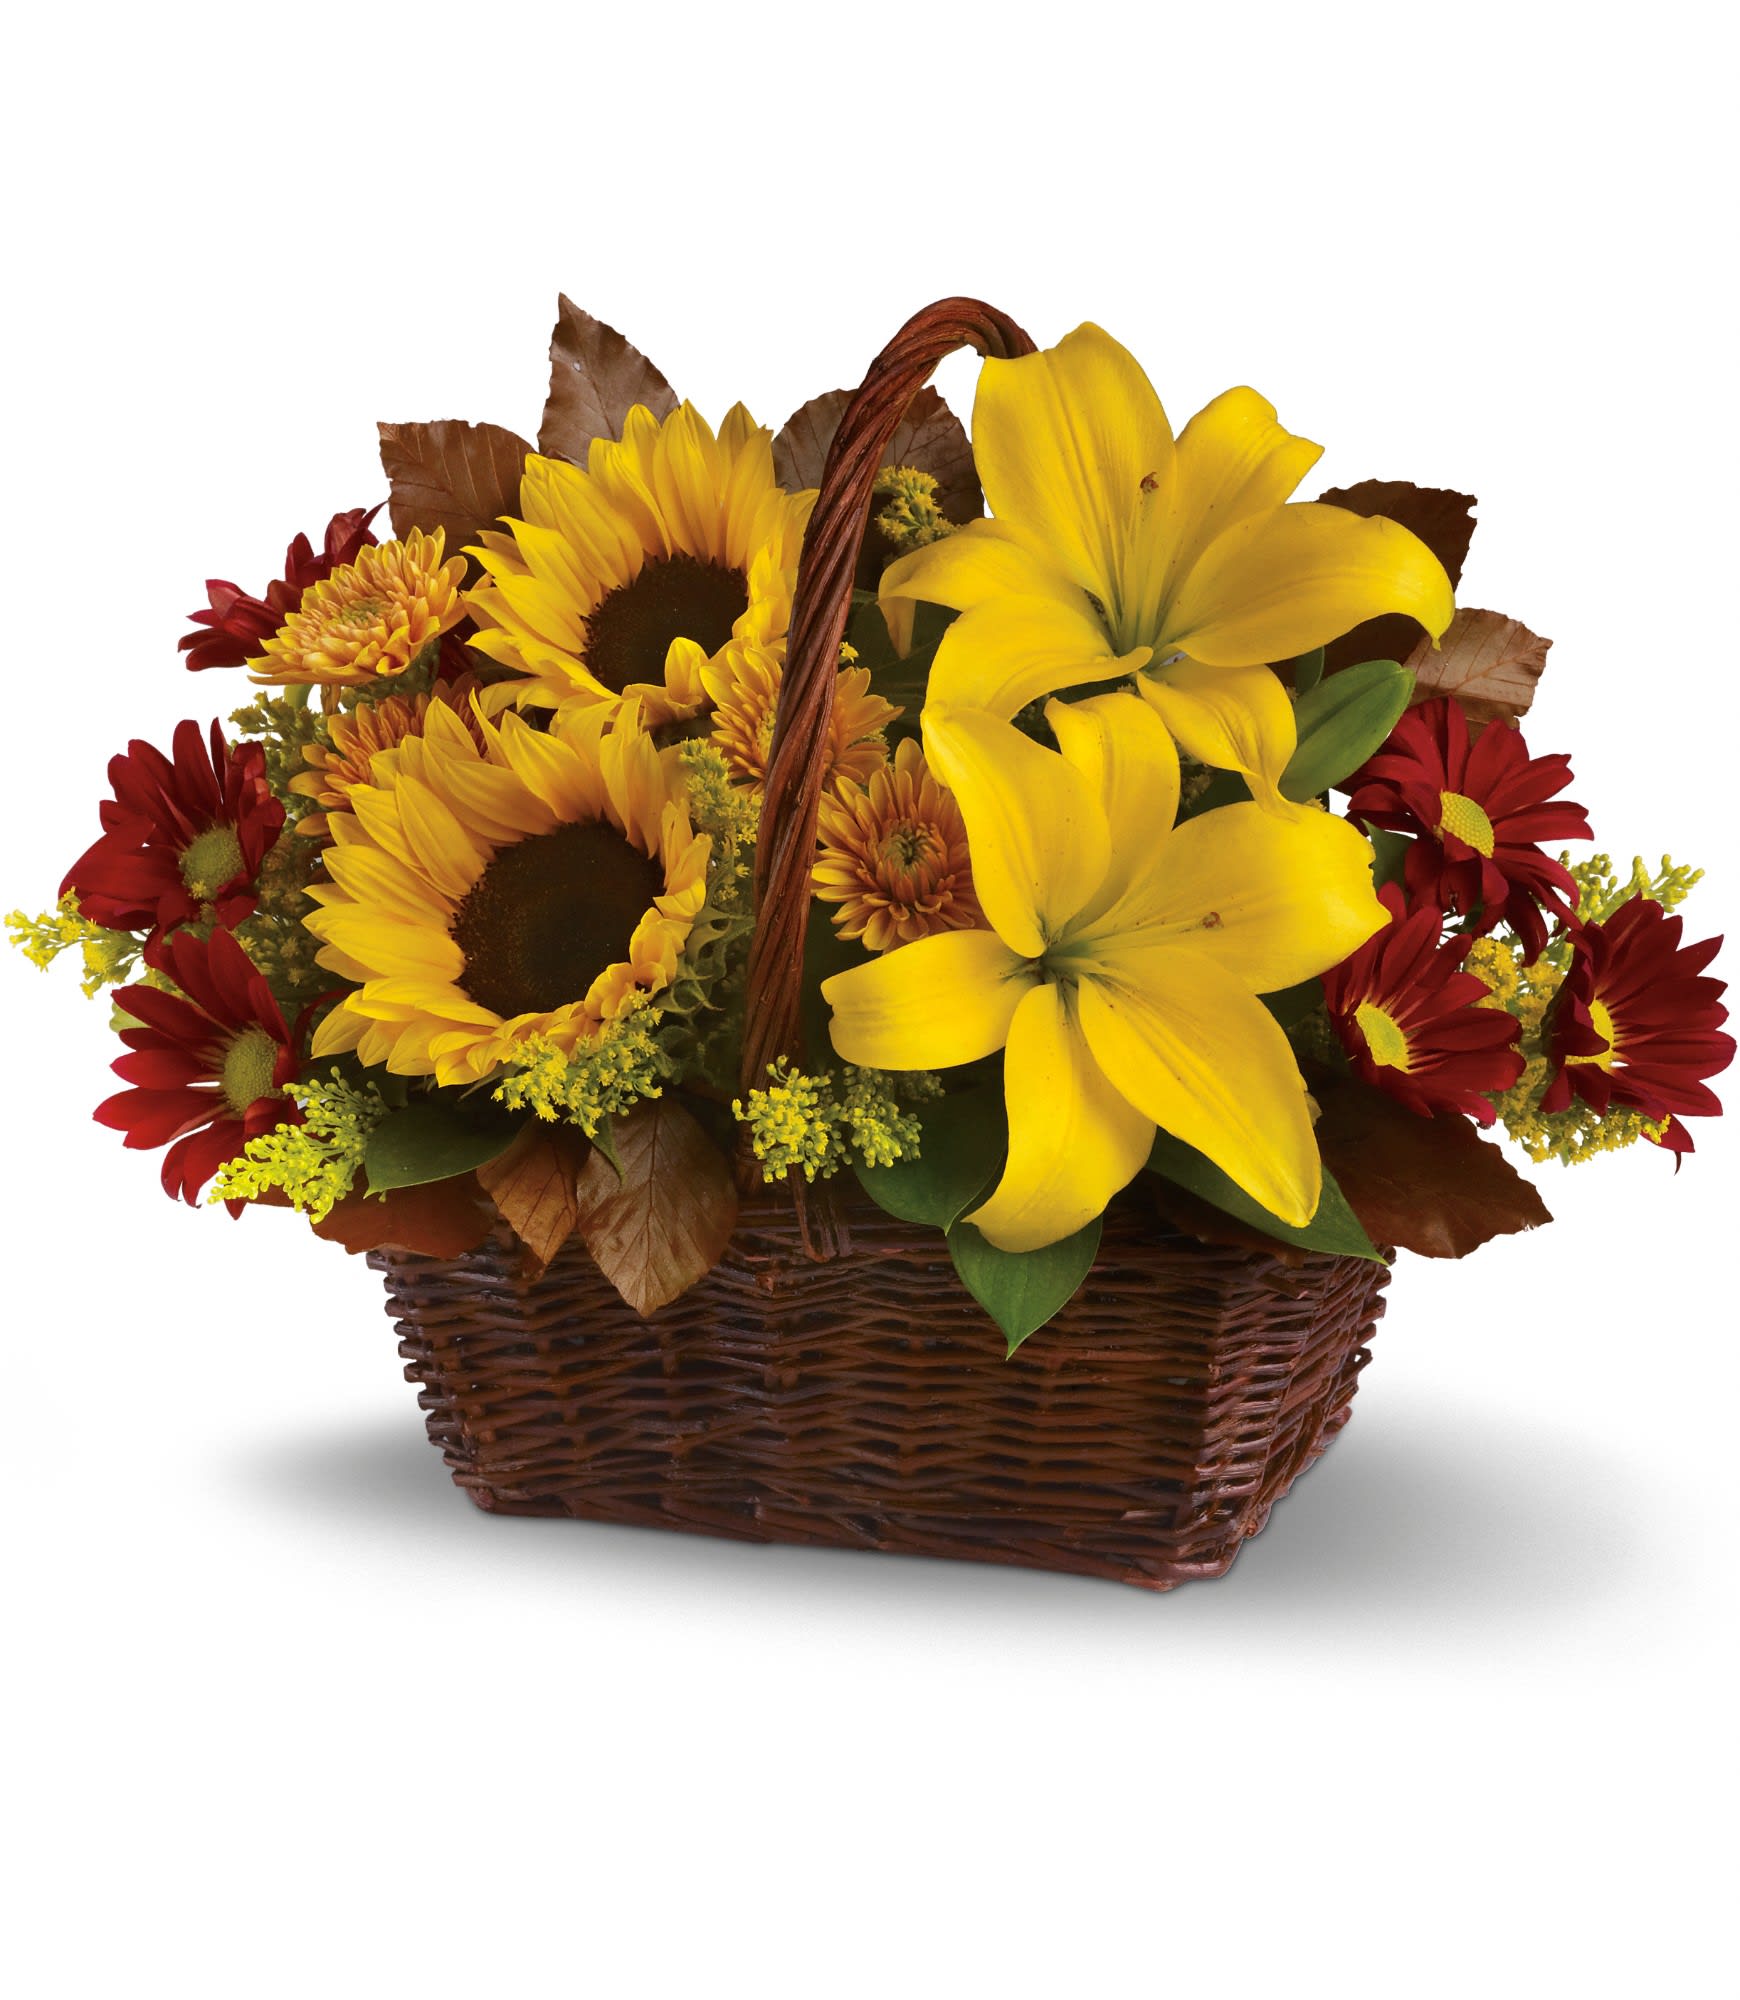 Golden Days Basket - Here's a golden opportunity to make someone's day. Just send this delightful basket of fresh fall flowers to someone who's on your mind and you can be sure it will lift their spirits!    Sunny sunflowers and asiatic lilies, red roses, gold and burgundy chrysanthemums, solidaster, brown copper beech and salal are splendidly arranged in a wicker basket. Send it and you'll be golden, too.    Approximately 14 1/4&quot; W x 10 1/2&quot; H    Orientation: All-Around    As Shown : T174-2A  Deluxe : T174-2B  Premium : T174-2C